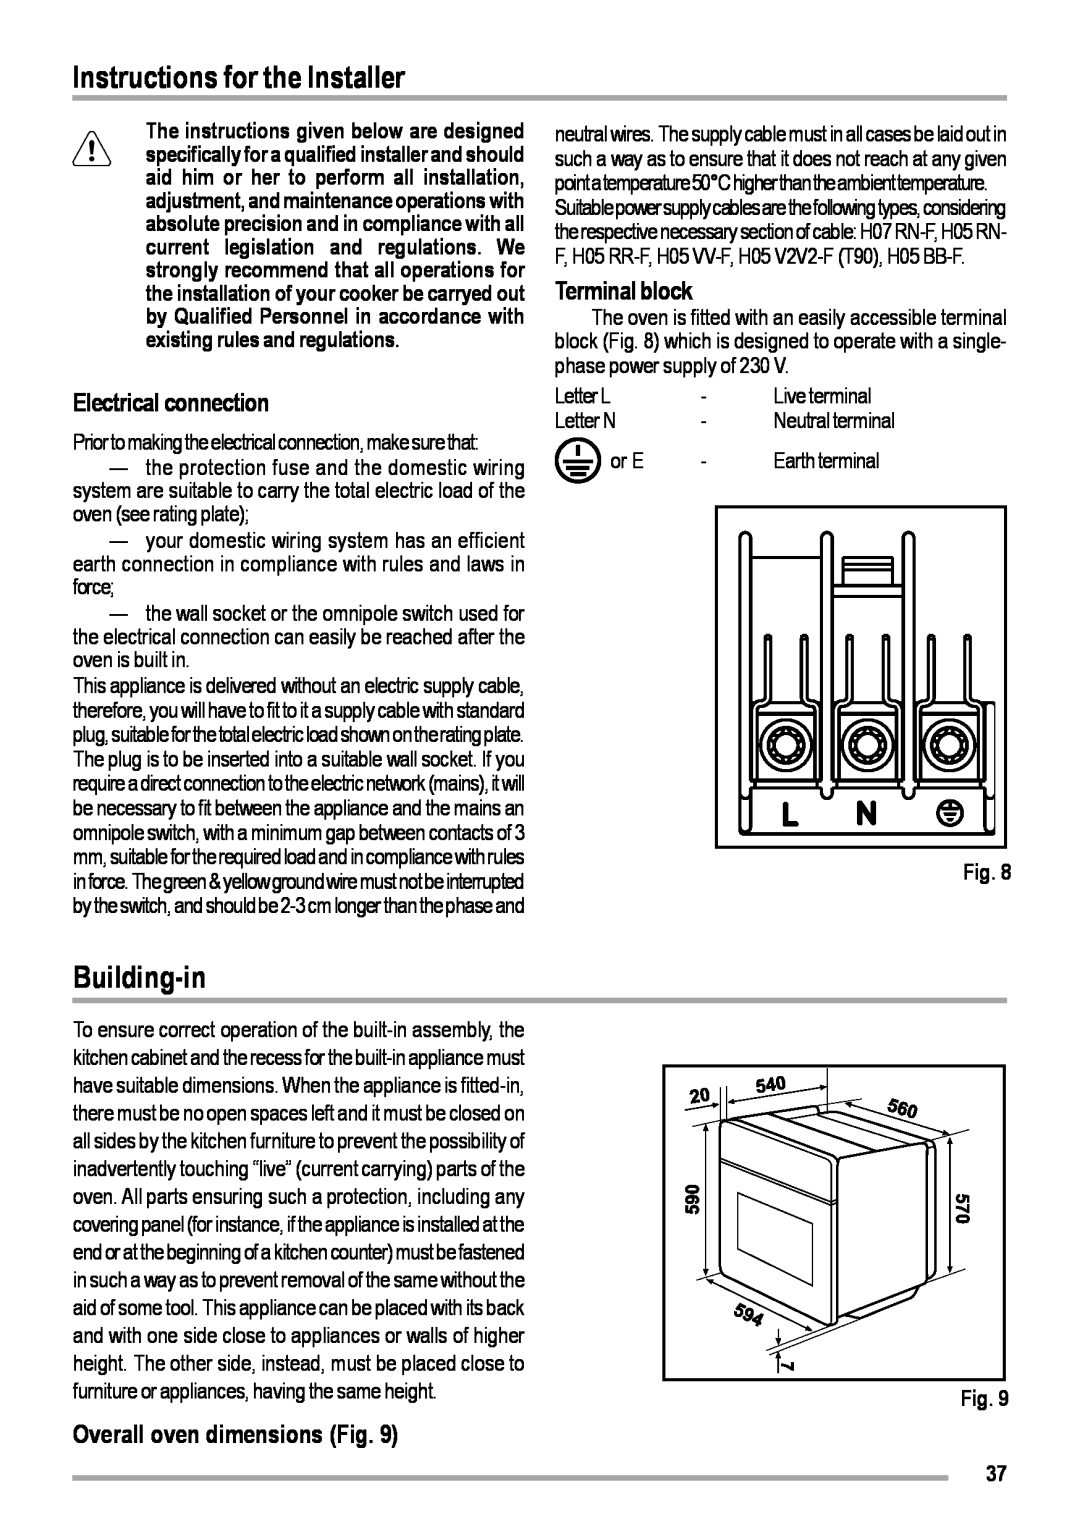 Zanussi ZOB 460 manual Instructions for the Installer, Building-in, Electrical connection, Terminal block 